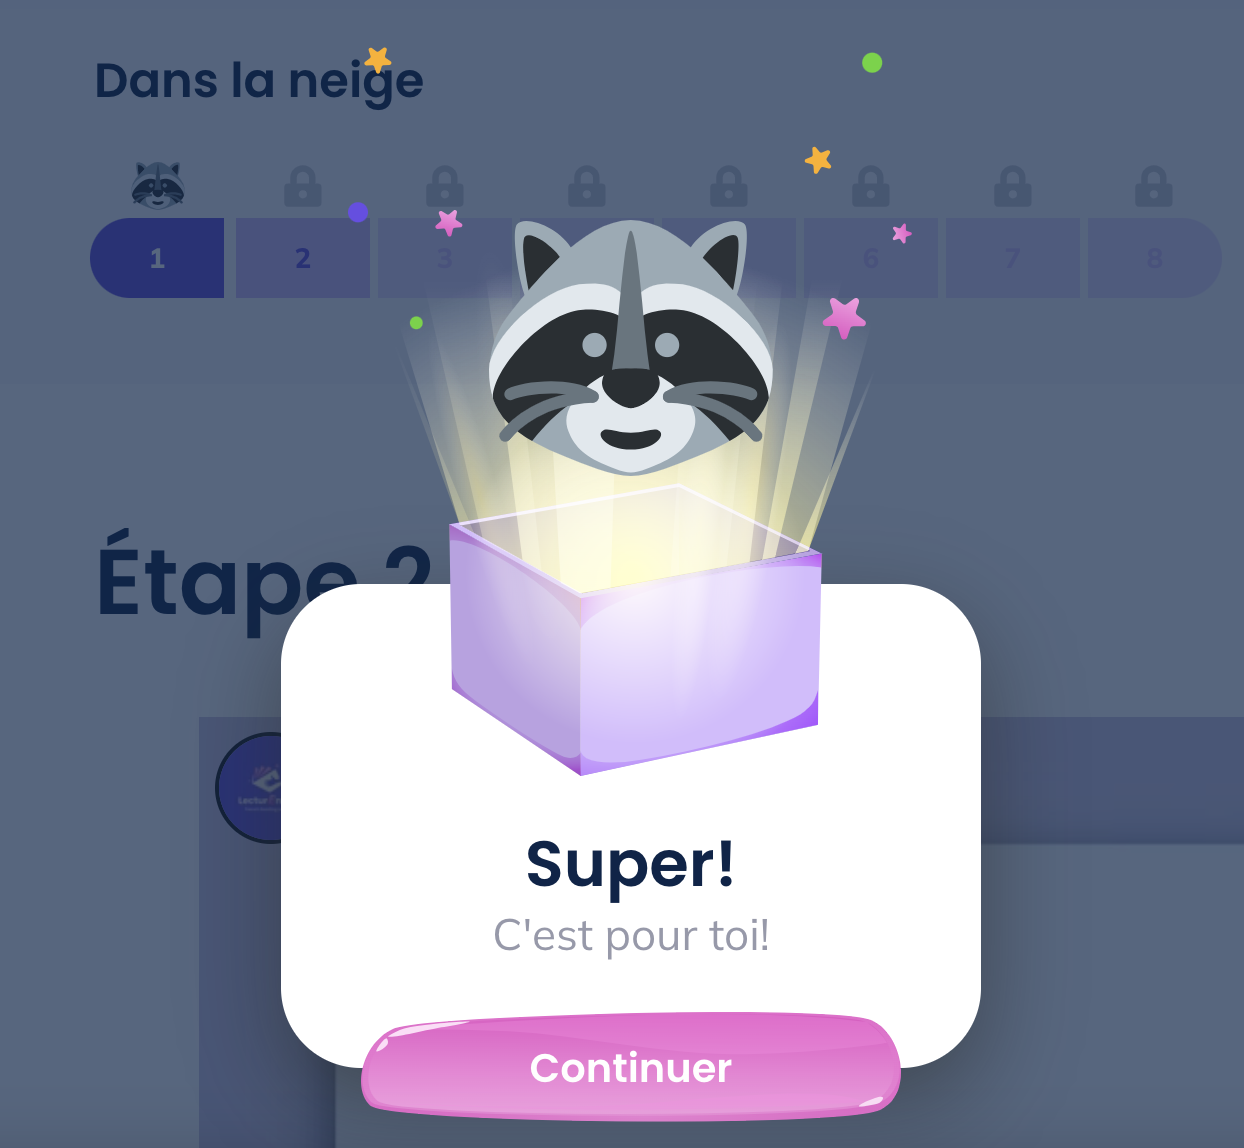 Student has completed a step and earns a racoon emoji.